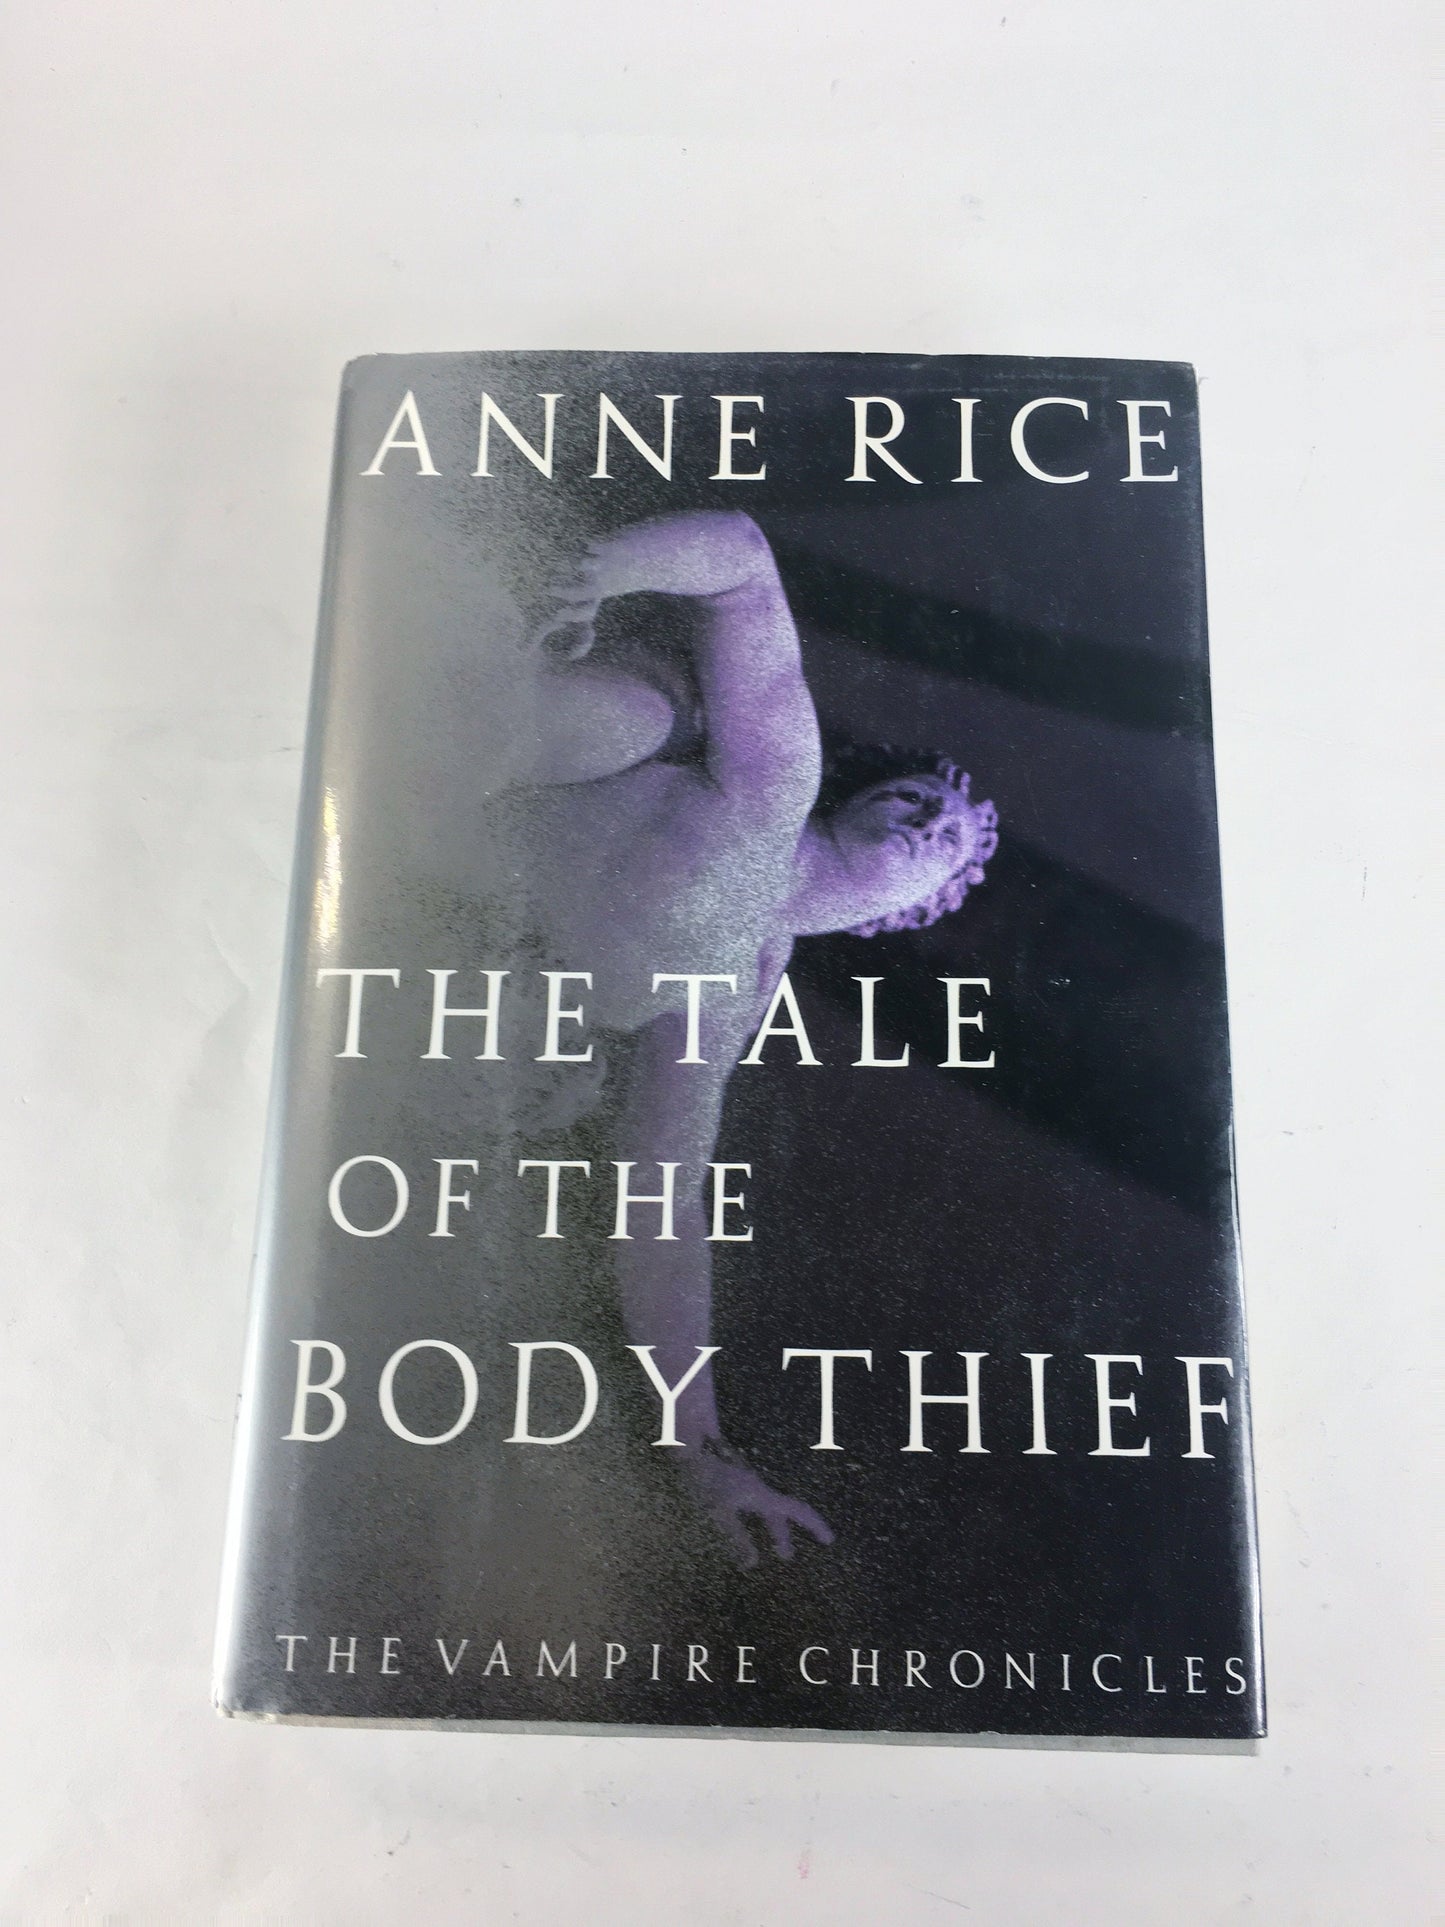 Tale of the Body Thief by Anne Rice. FIRST EDITION vintage hardcover circa 1992. Historical horror. Black book decor. Collectible gift